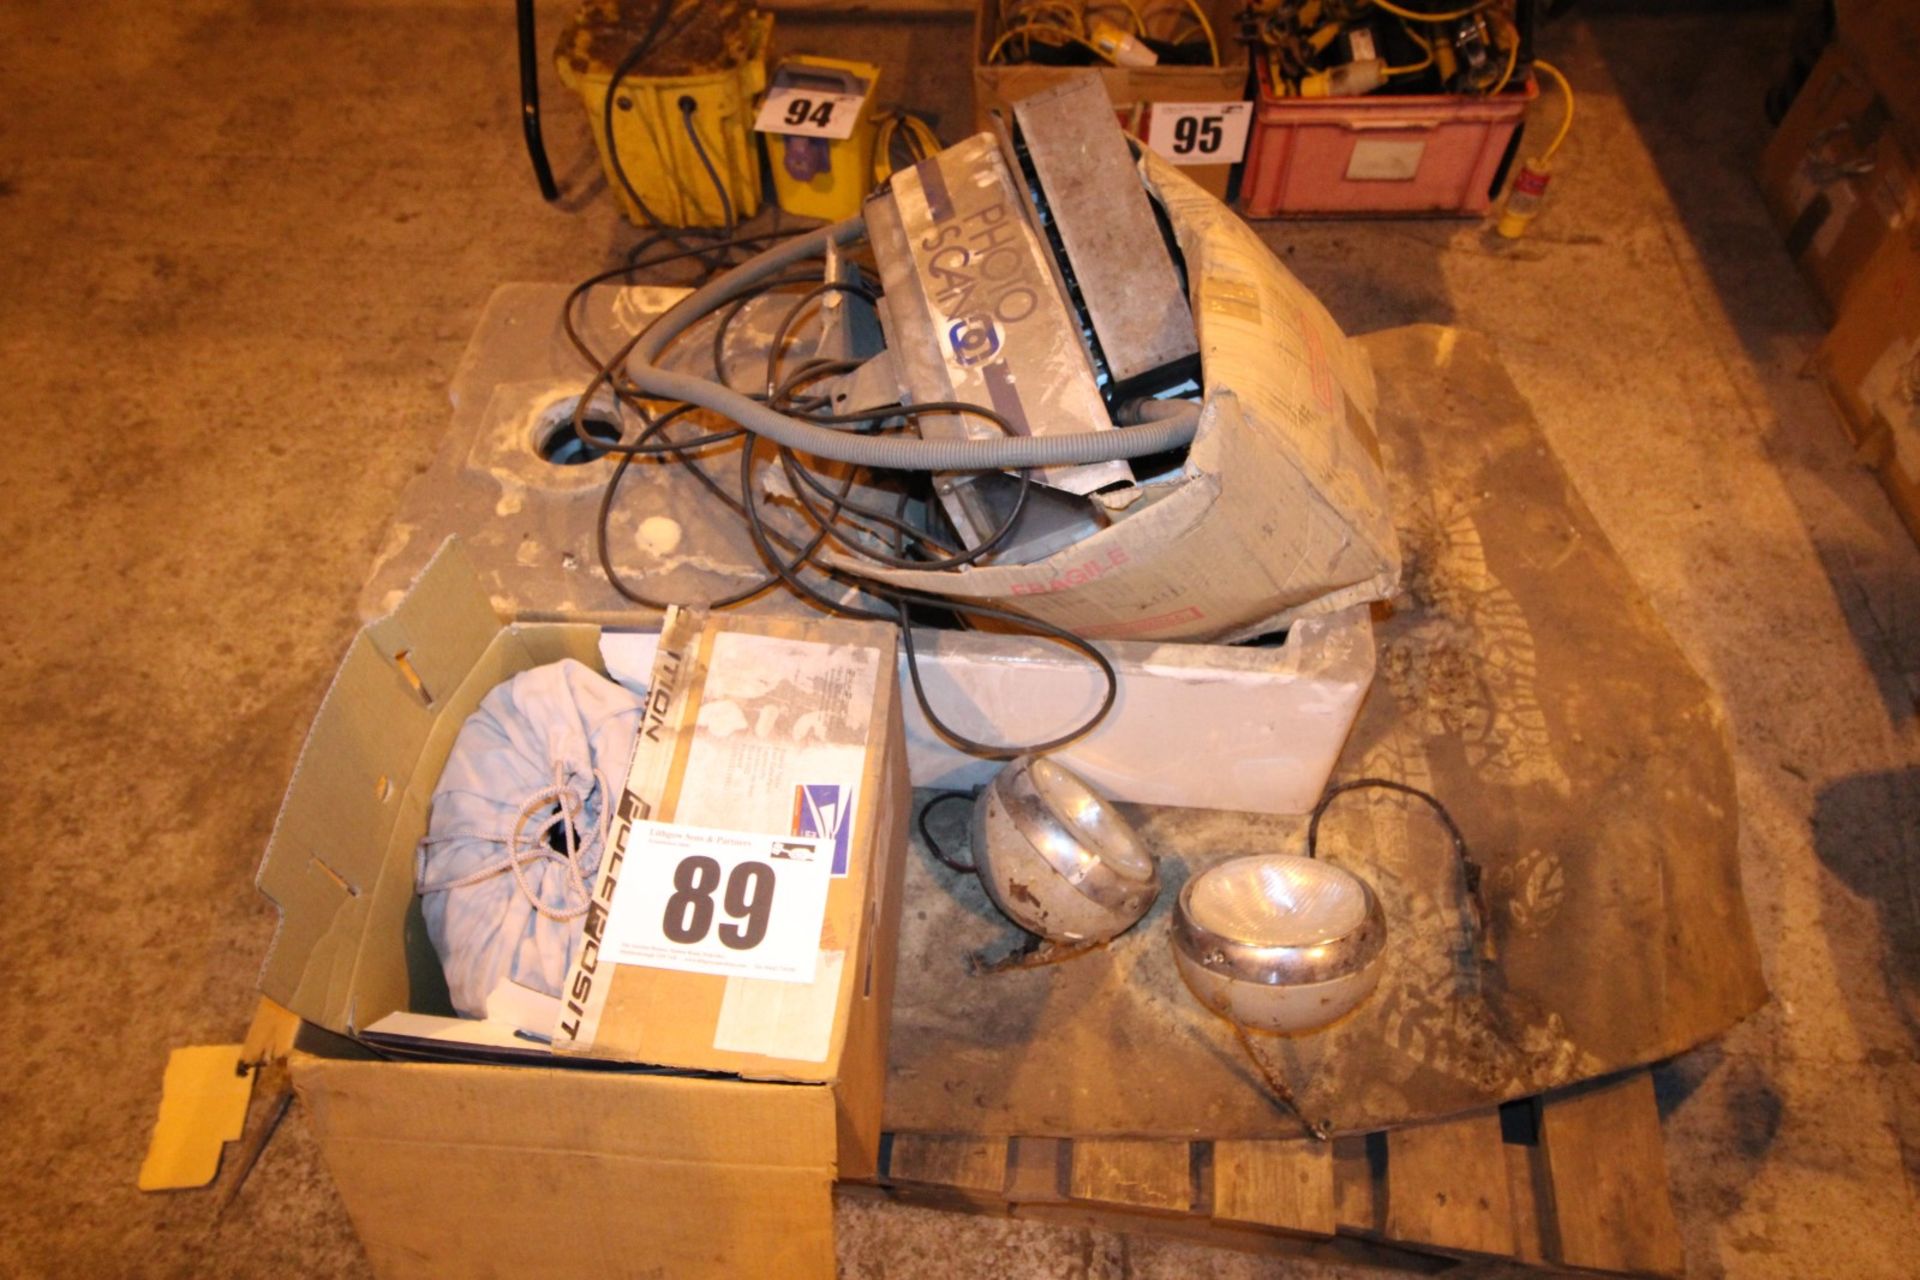 CONTENTS ON PALLET HEAVY BELFAST SINK APPROX. 3FT, SPECIALIST HELMET, SPOT LAMPS AND MISC.